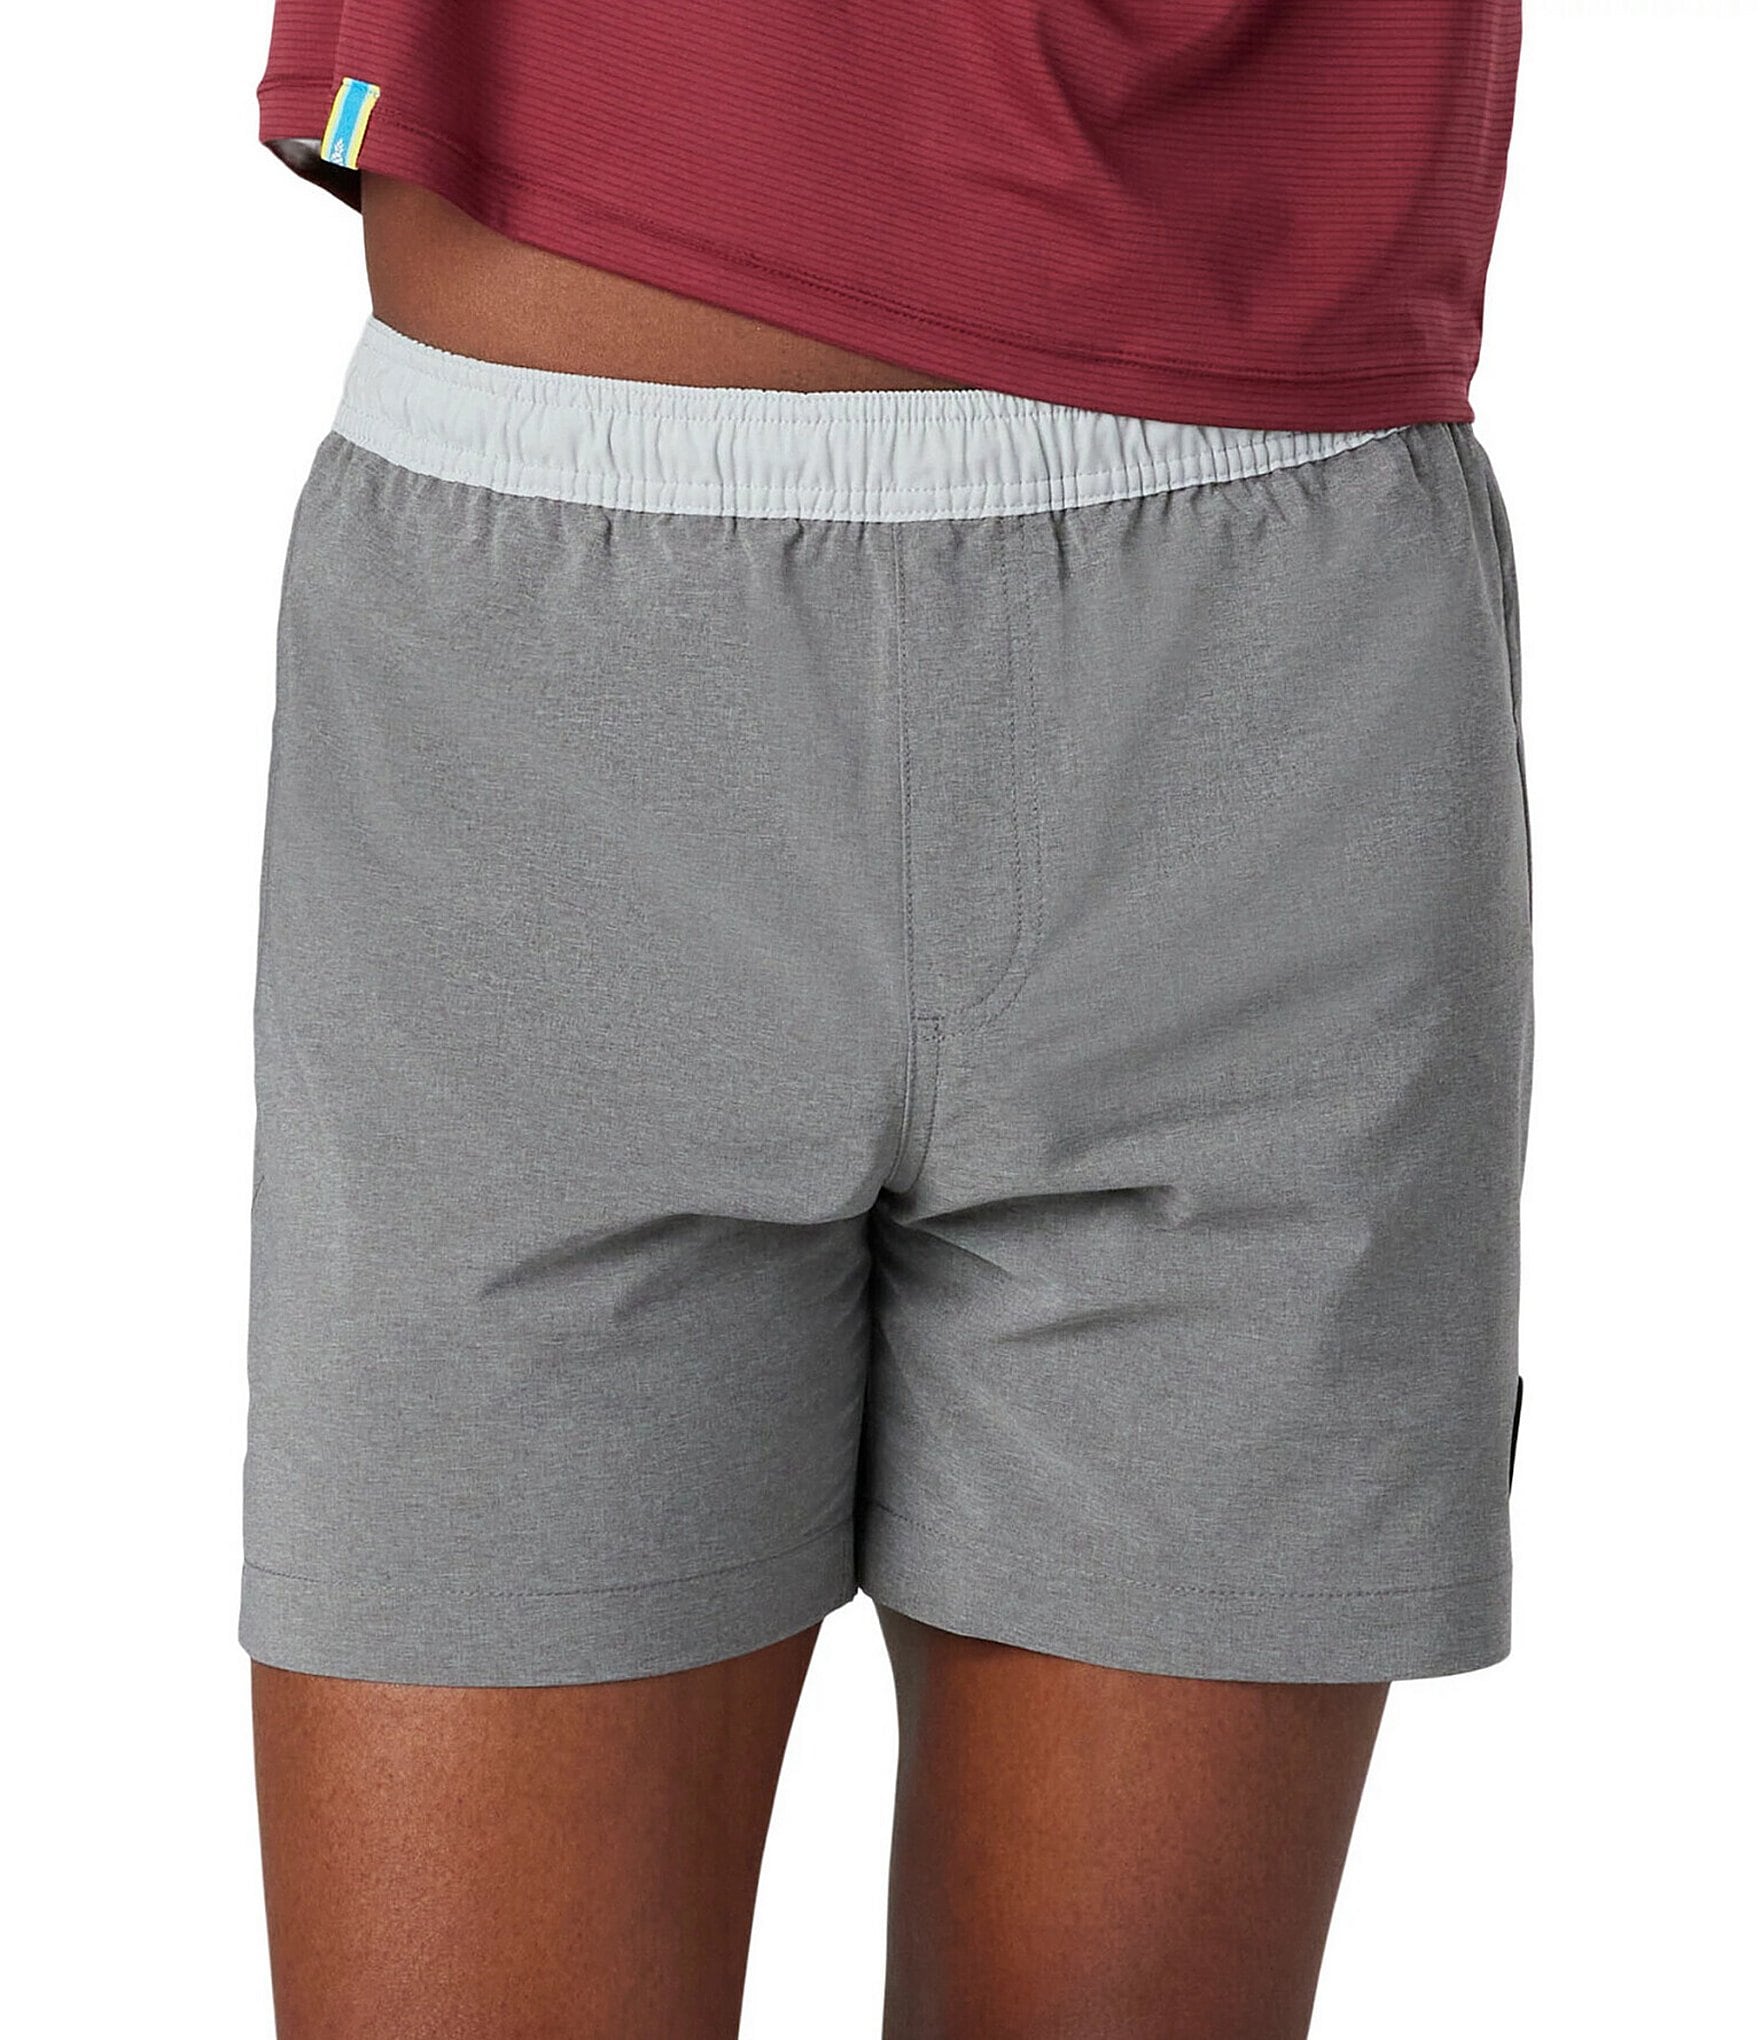 Chubbies The Two Tones 55 Inseam Stretch Shorts Dillards 6739